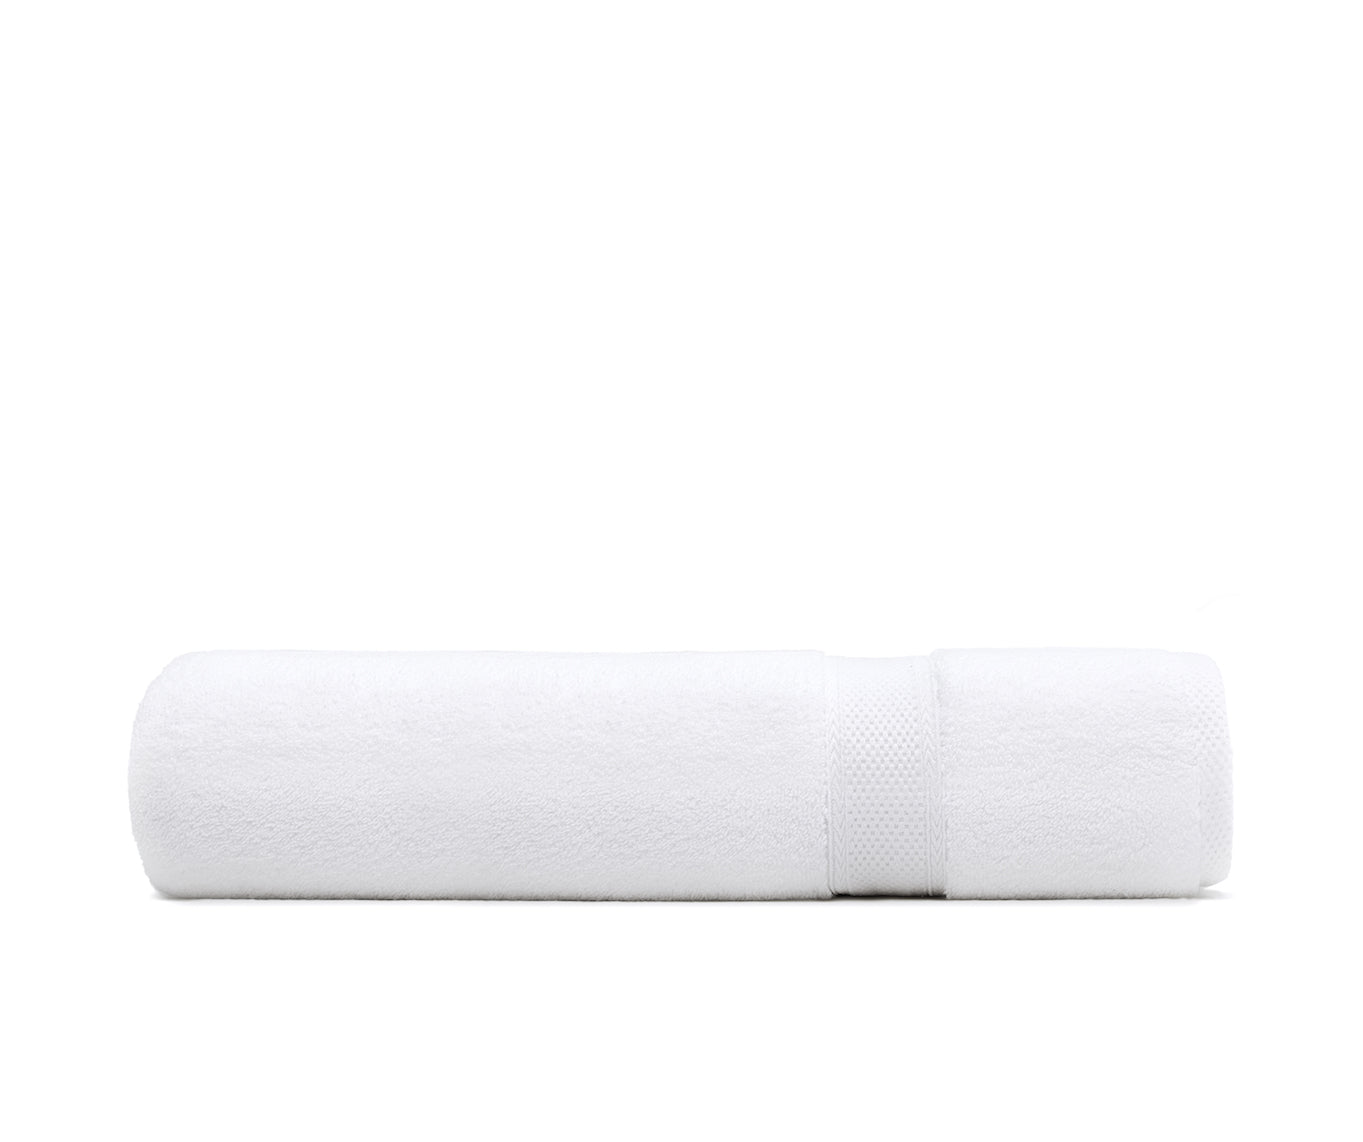 IzanStore - Soft and Plush Louis Vuitton Towel Set is a pure joy to the  touch Shop Now 🛒🛒🛒: . . . . #stayhome #staysafe  #bathtowel #towelset #absorbent #Soft #fastdrying #luxury #highquality #